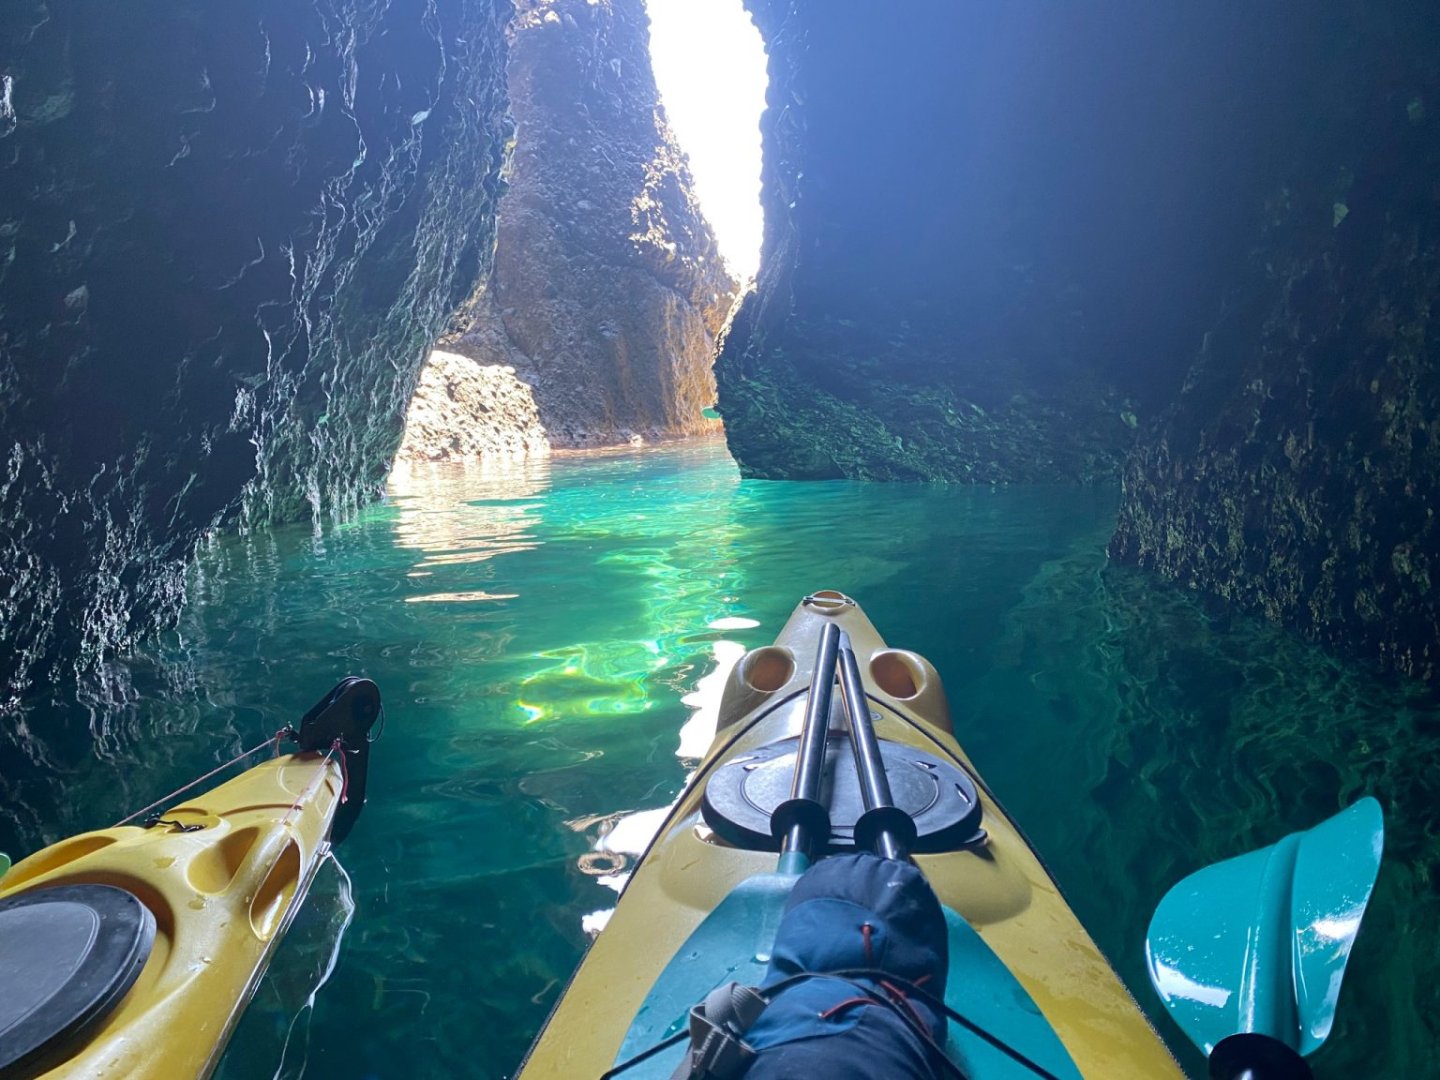 Kayaking in Santorini sea cave and front of kayaks